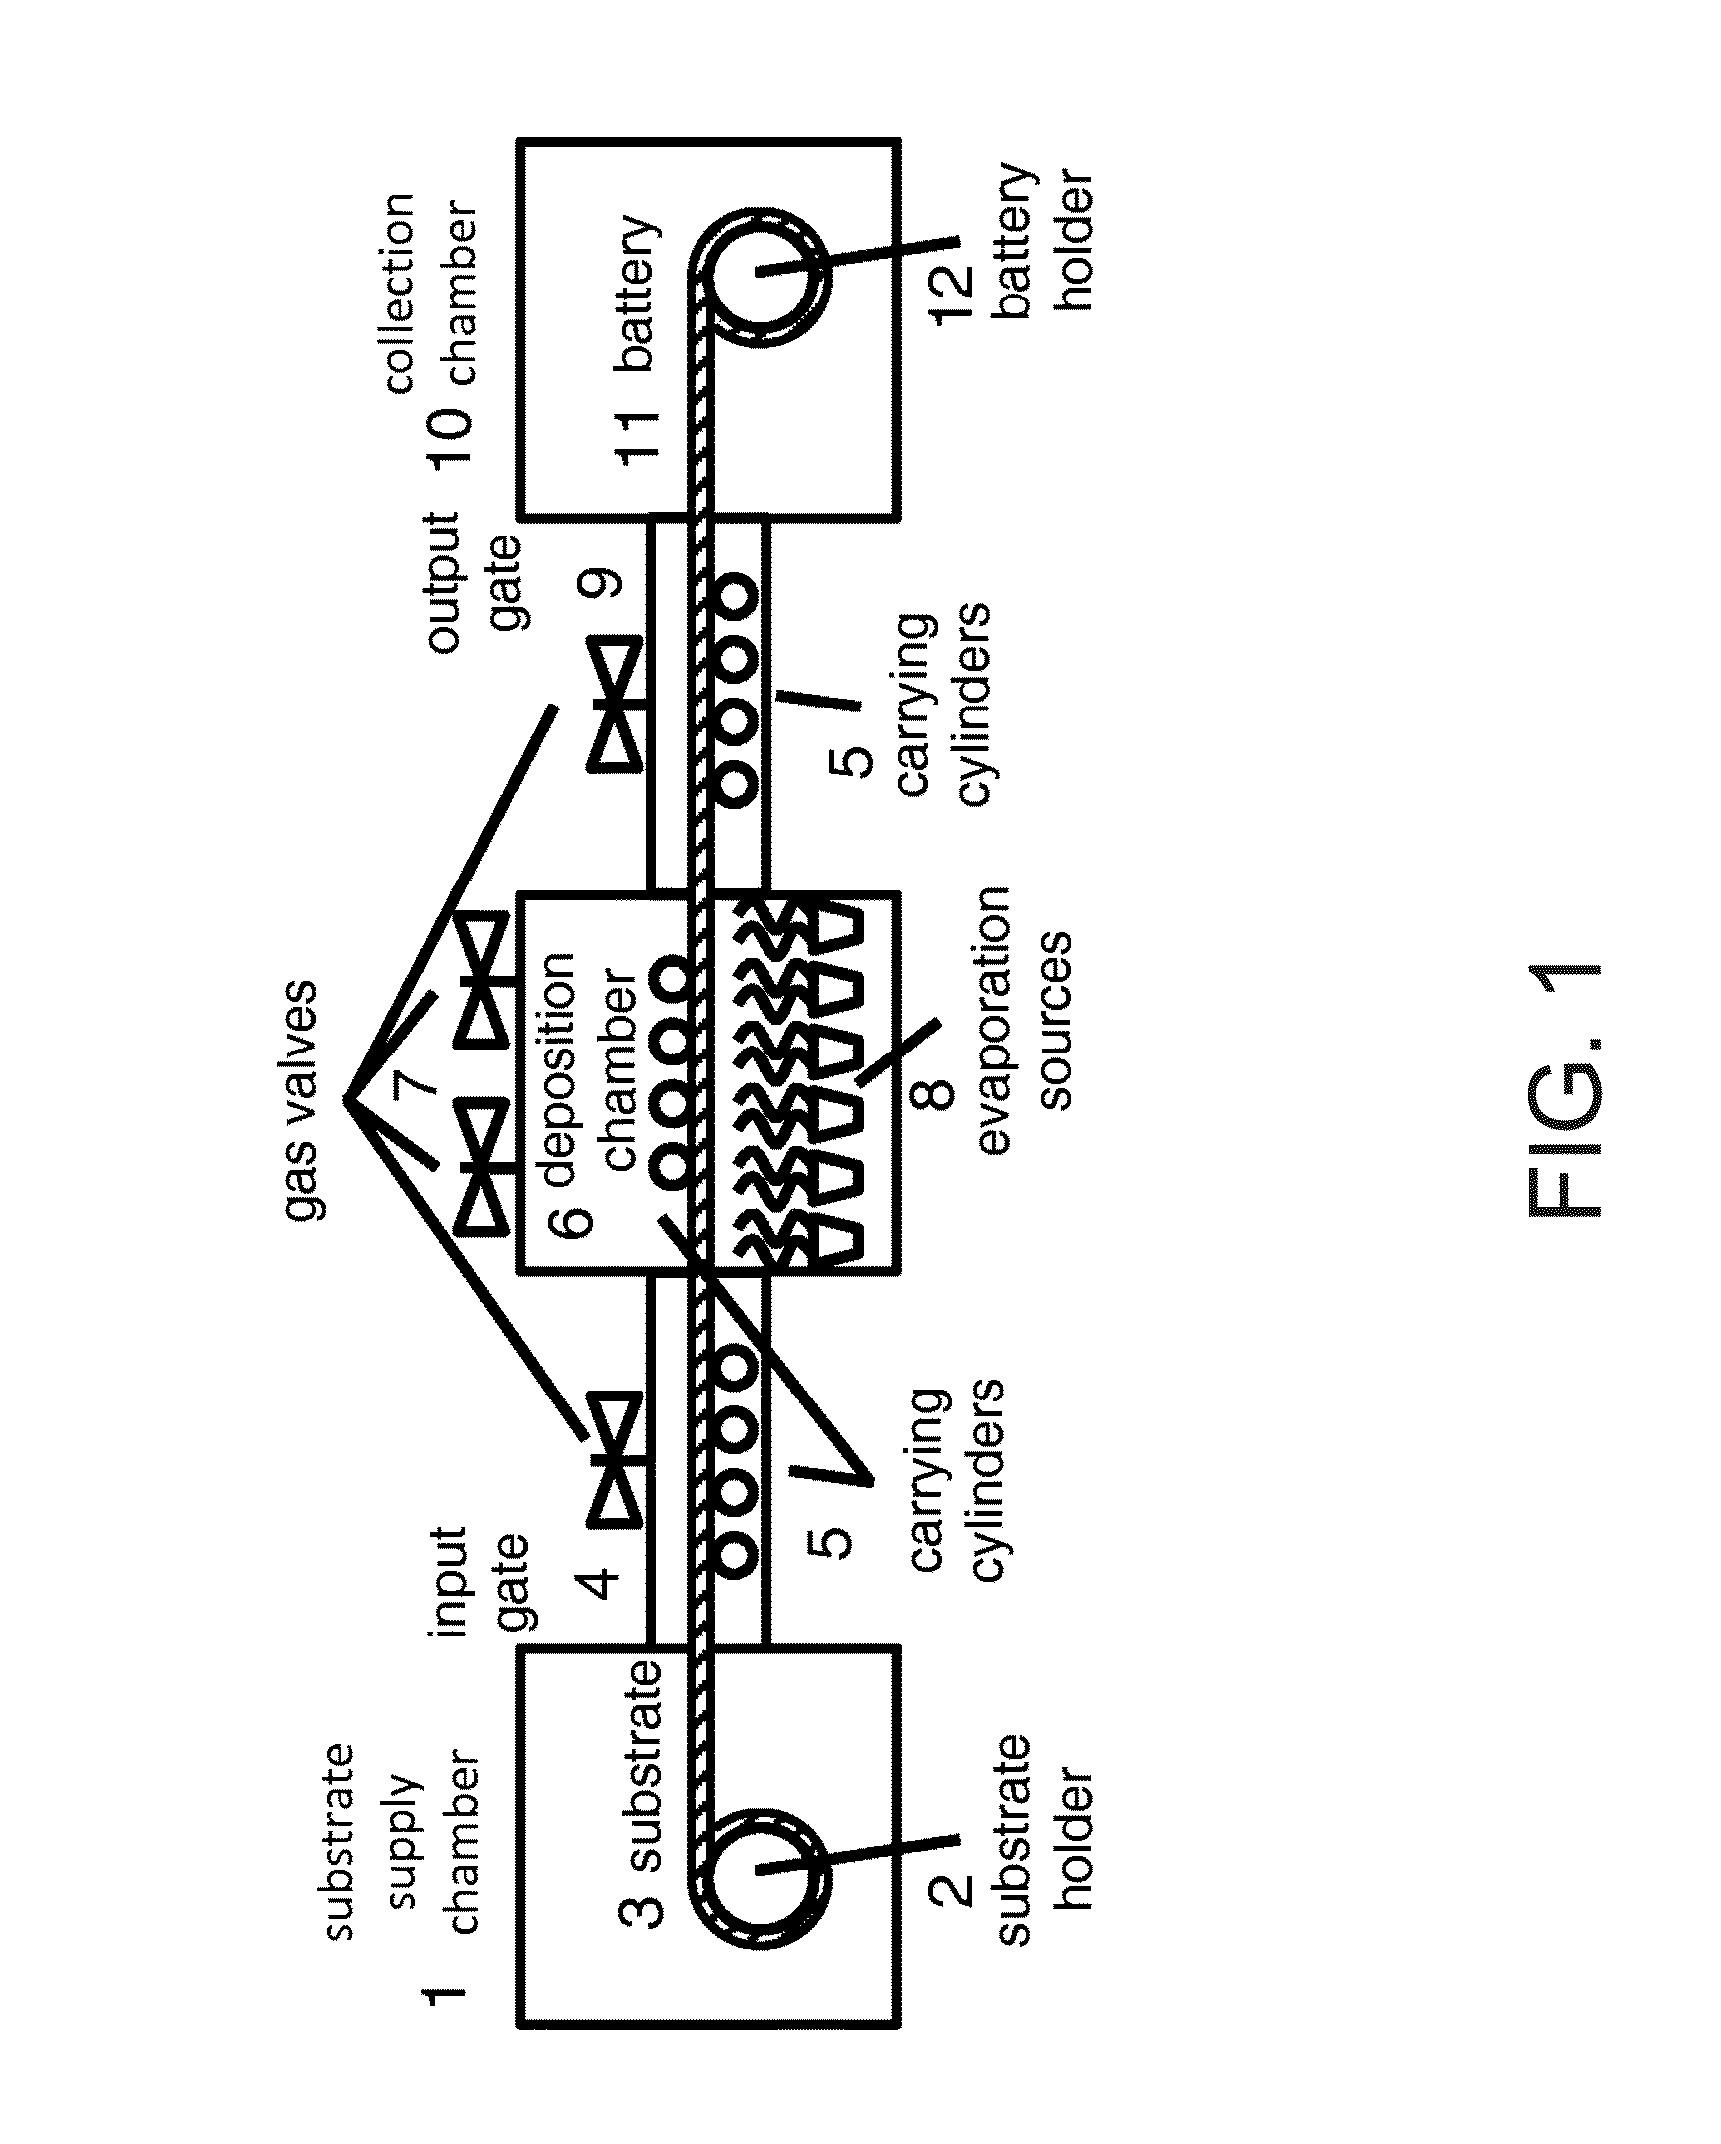 Packaging and termination structure for a solid state battery